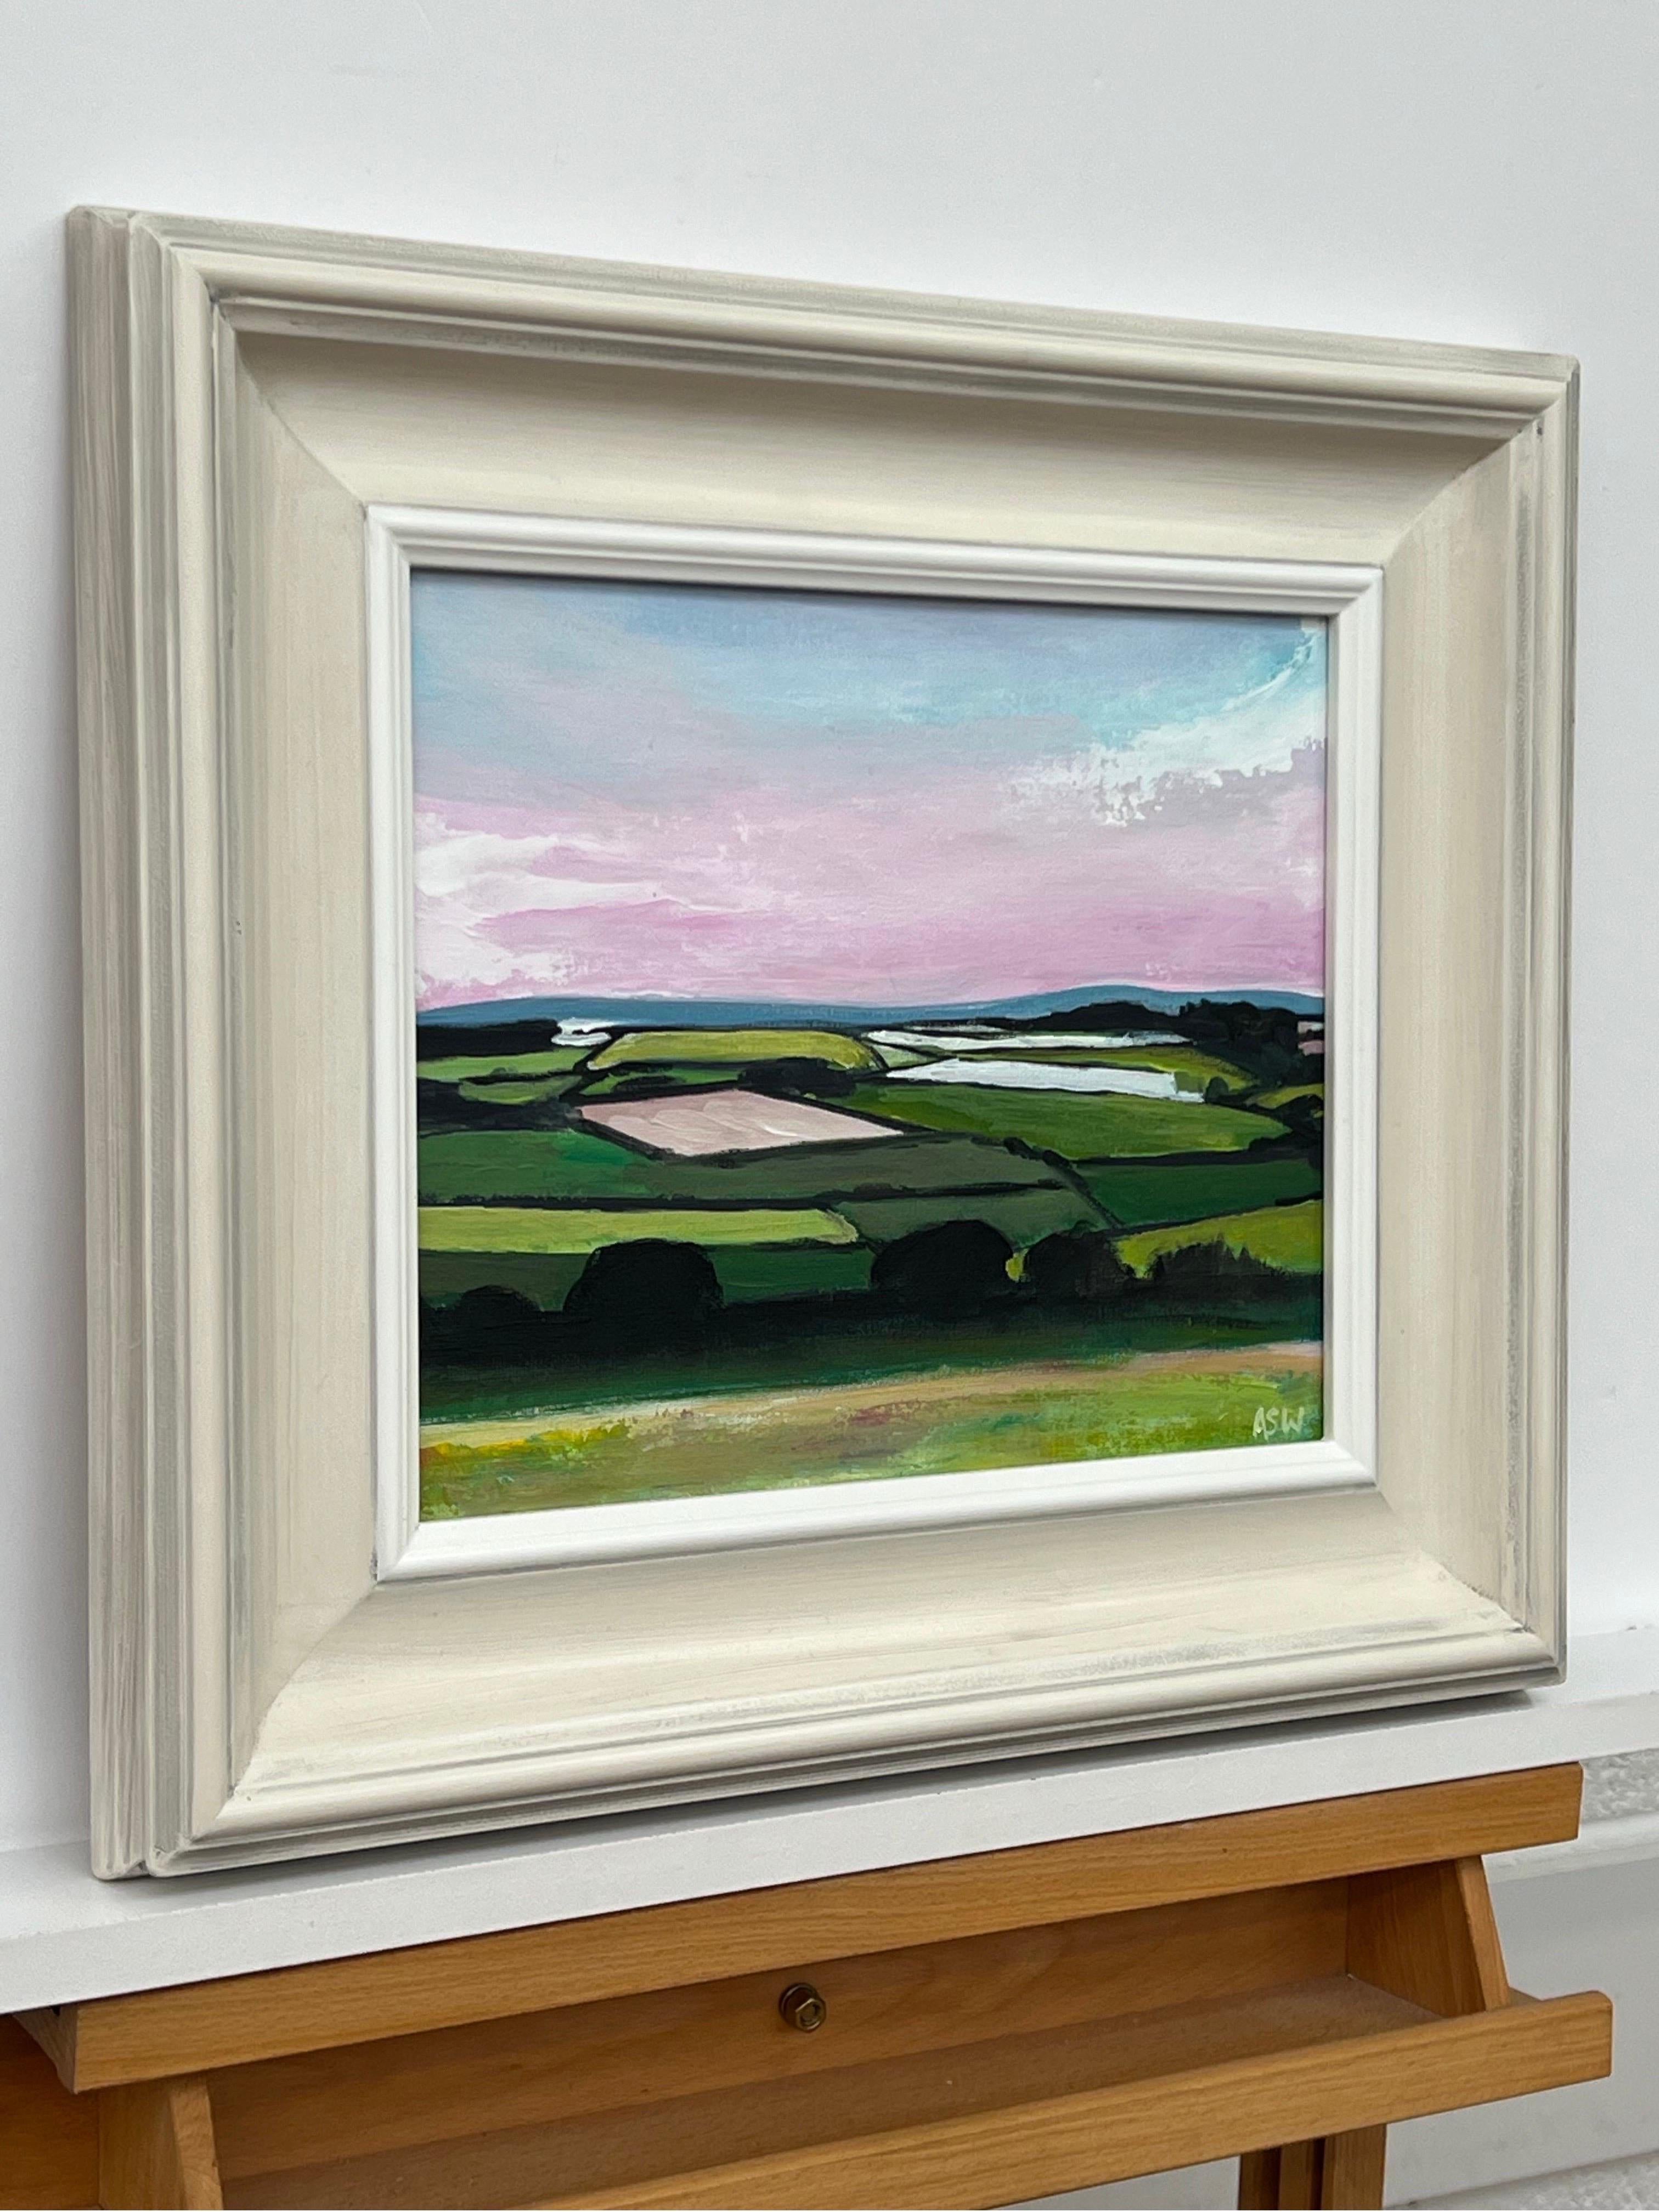 Patchwork quilt of vibrant green pasture, ploughed fields and farmland hedgerows - Painting by Angela Wakefield